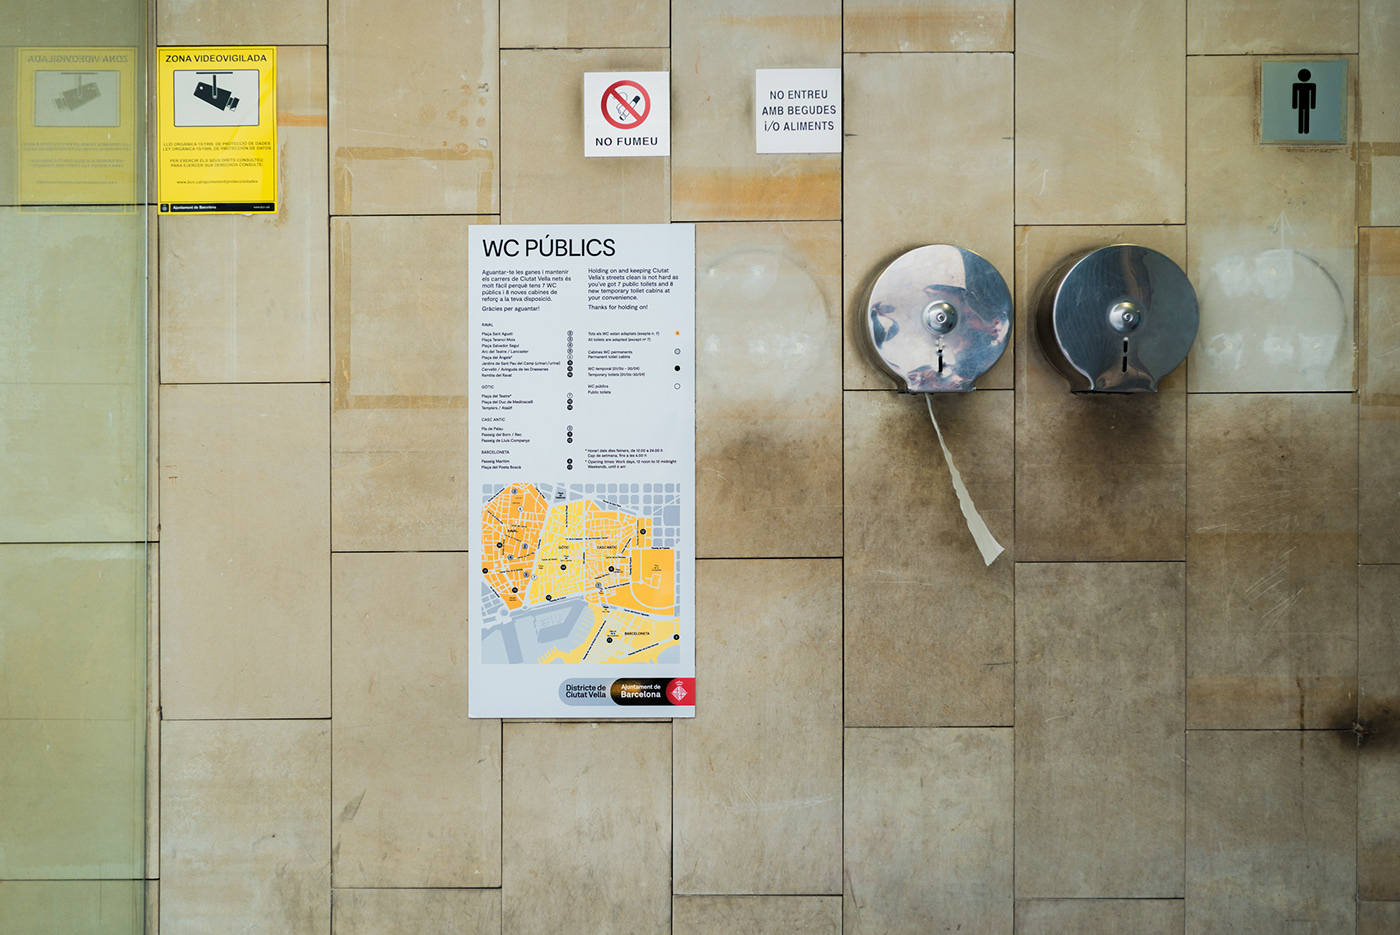 barcelona wc toilets pee yellow campaign graphic VisualSystem